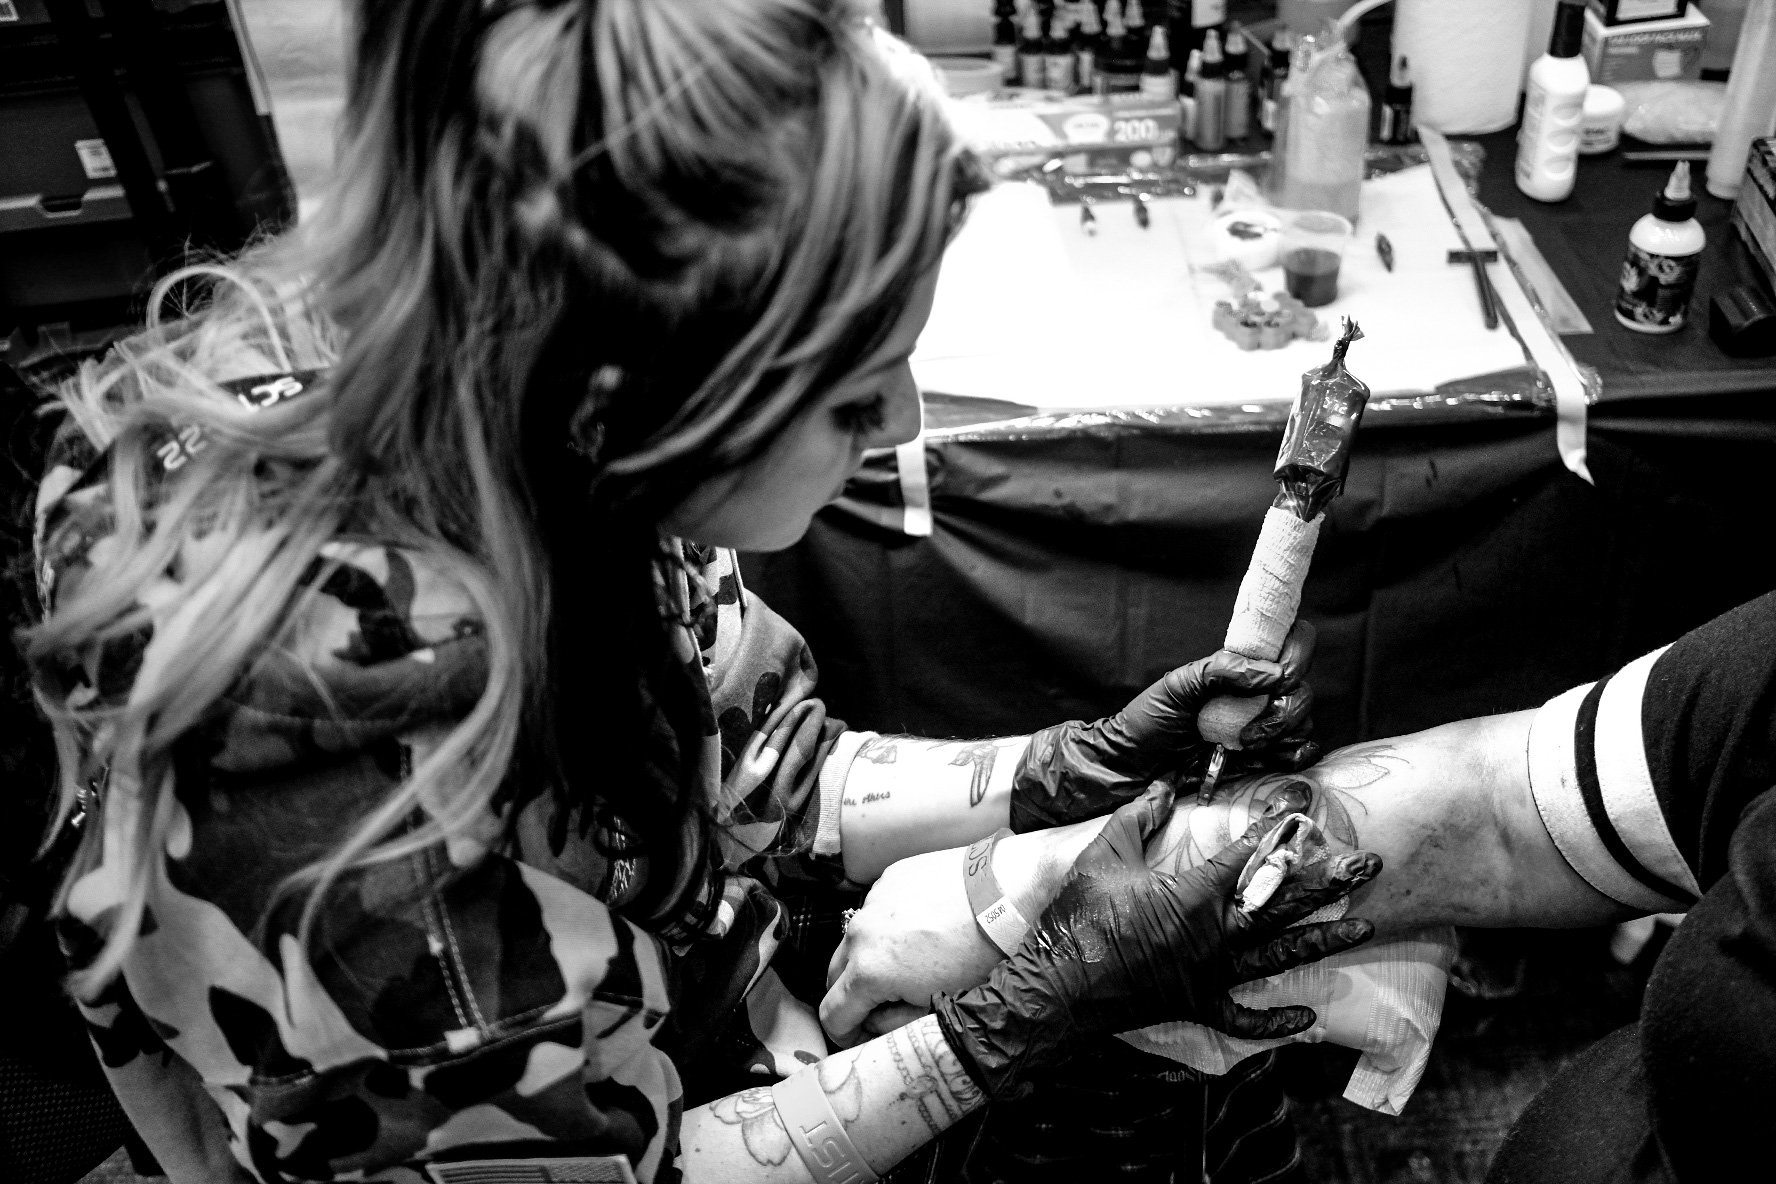 SPACE CITY TATTOO EXPO